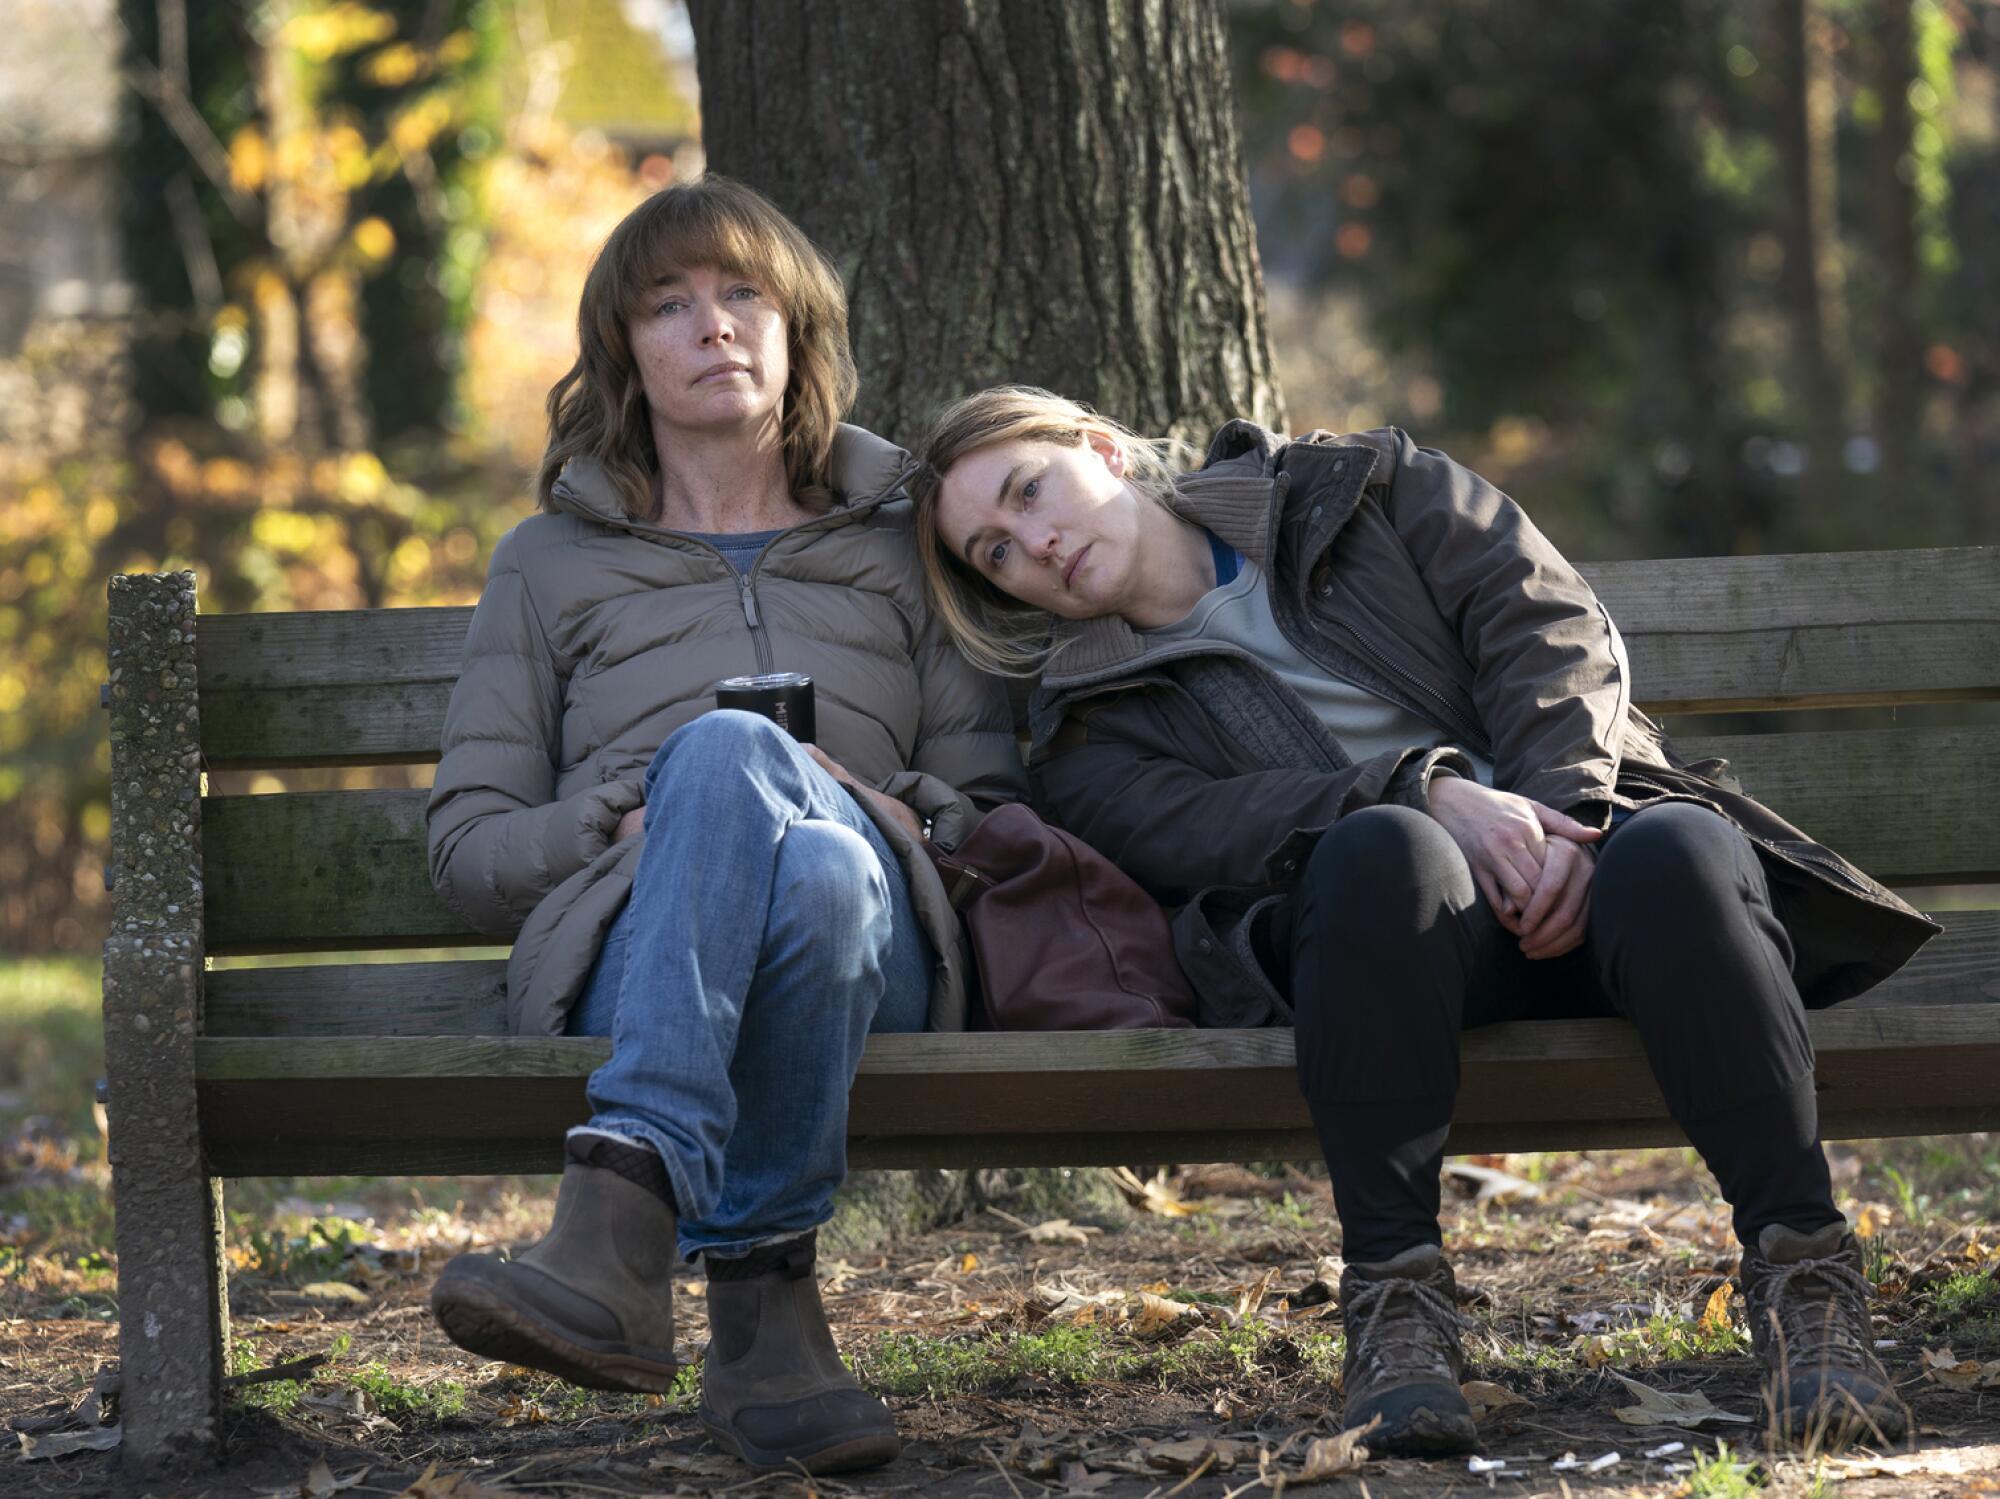 Two women sit on a park bench with one resting her head on the other's shoulder